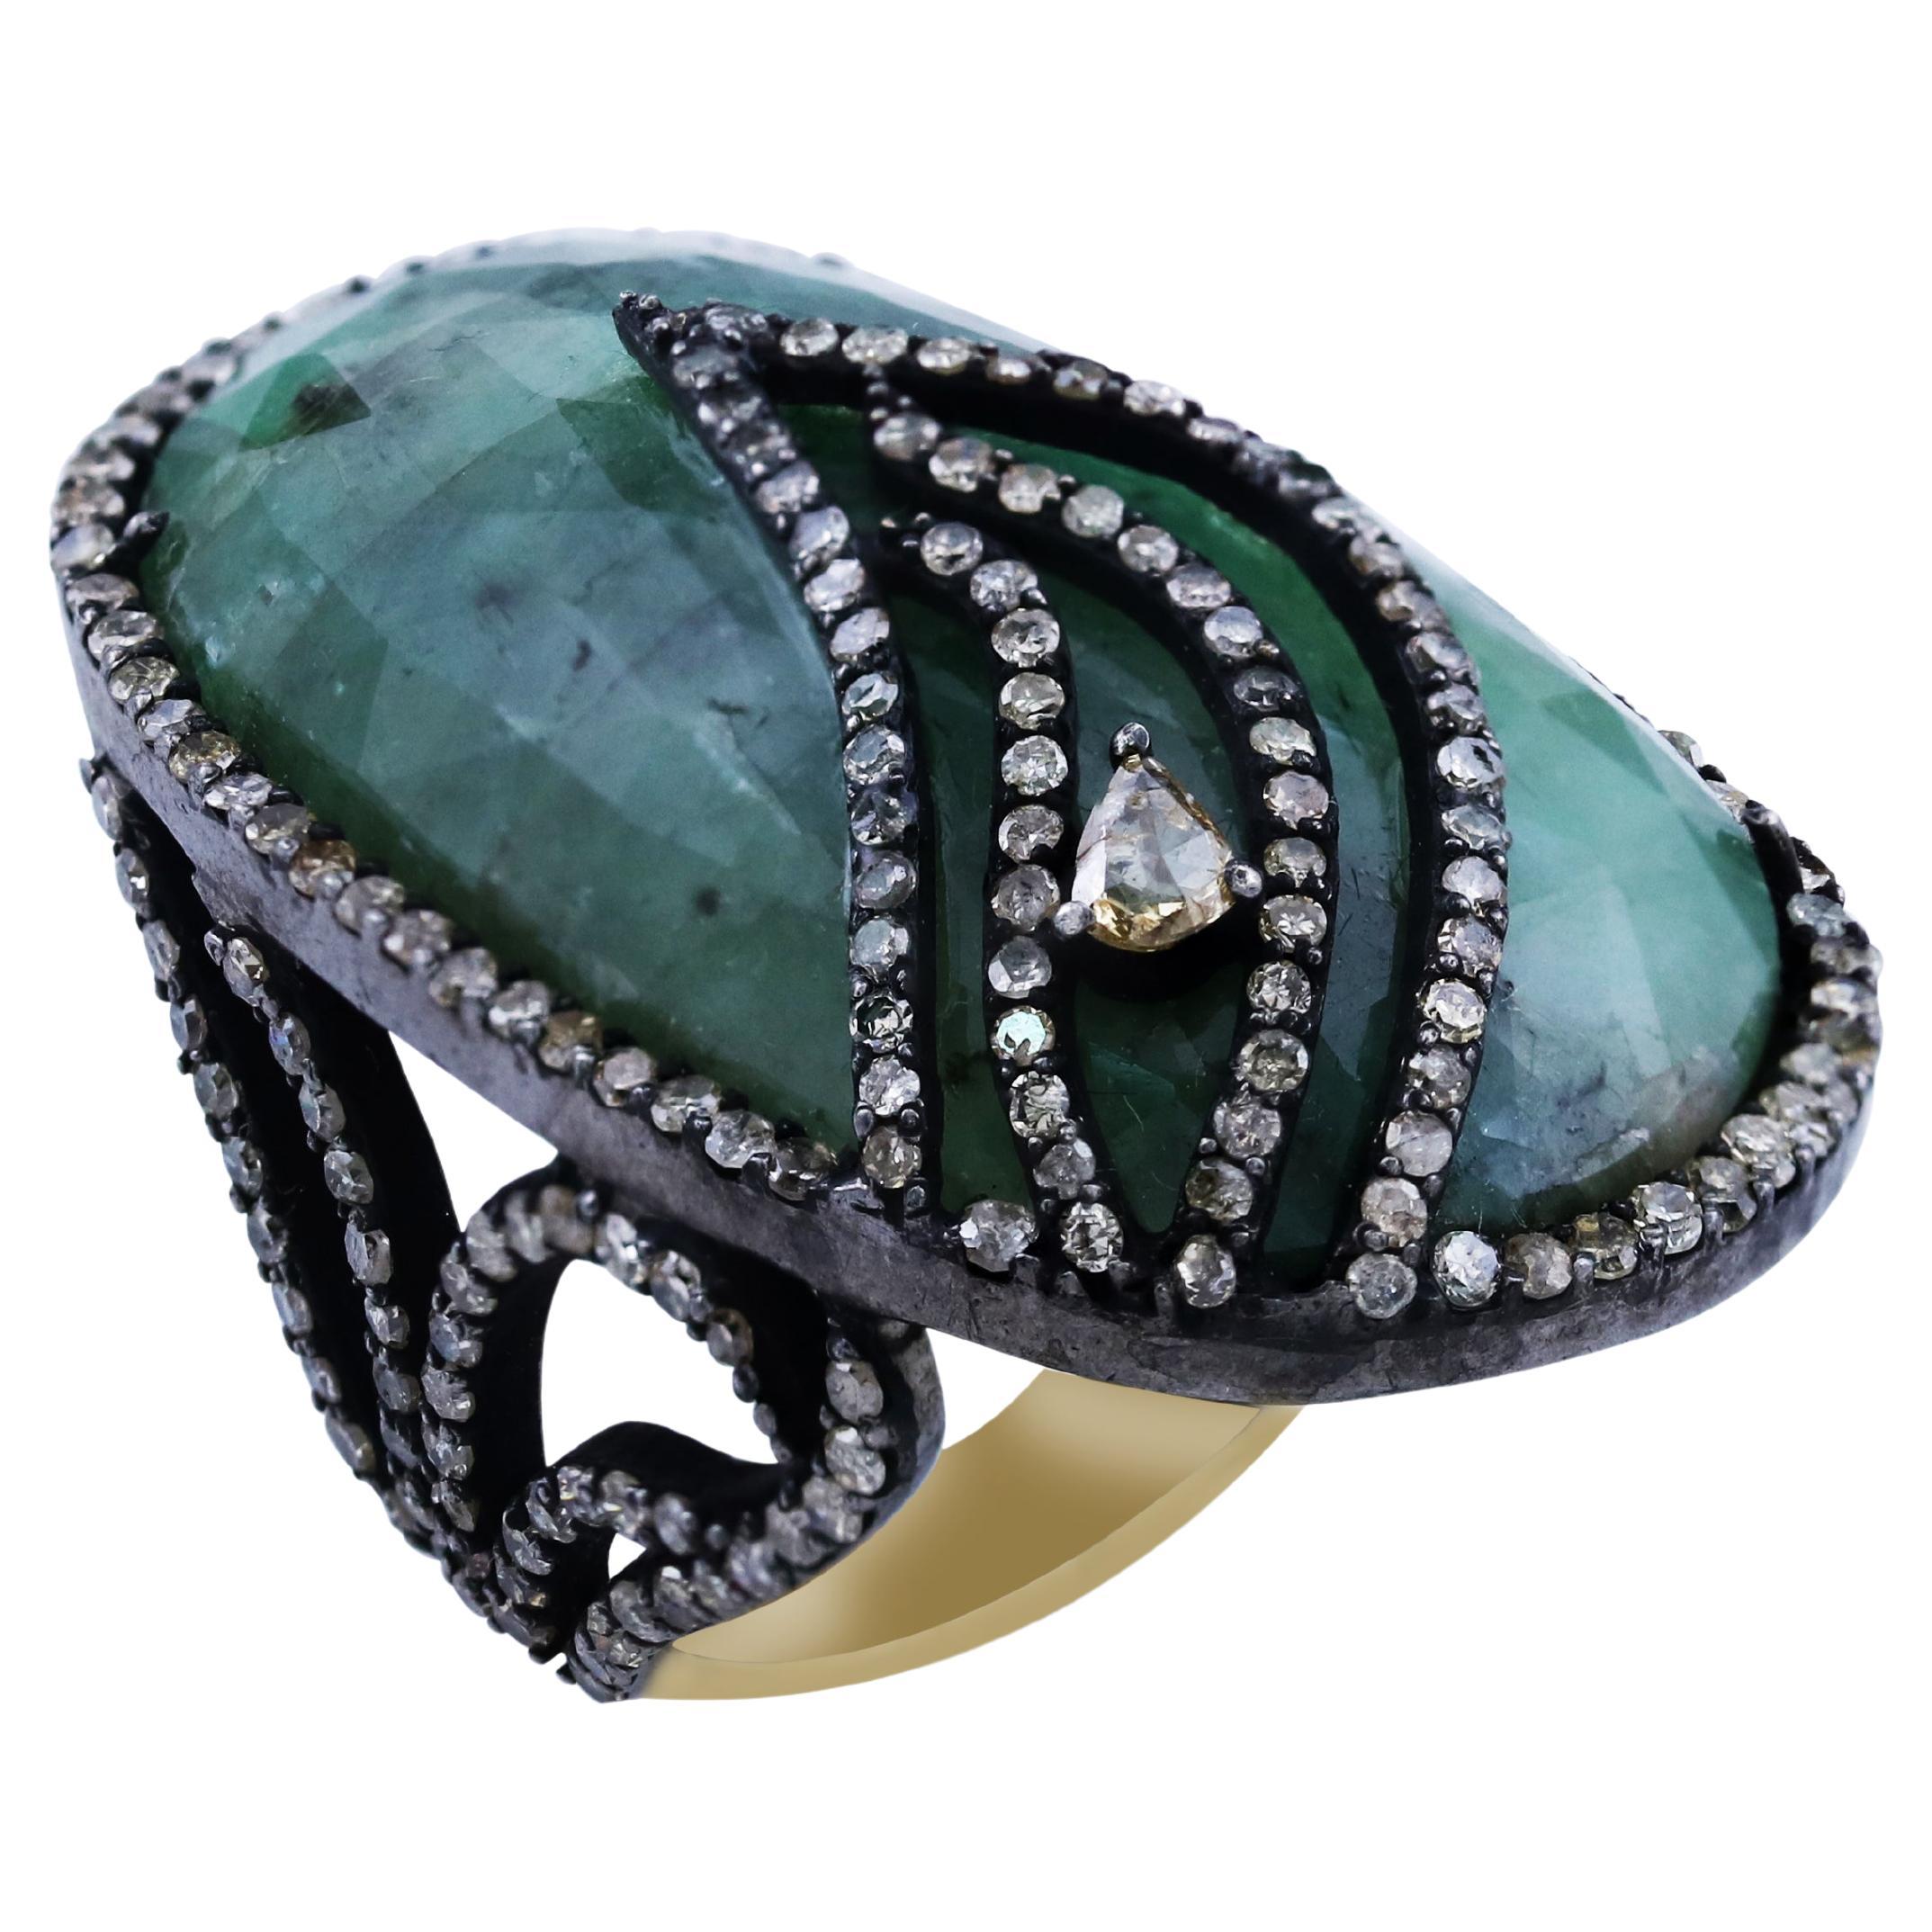 Gemistry Victorian 51.11cttw Diamond and Emerald Open Work Ring